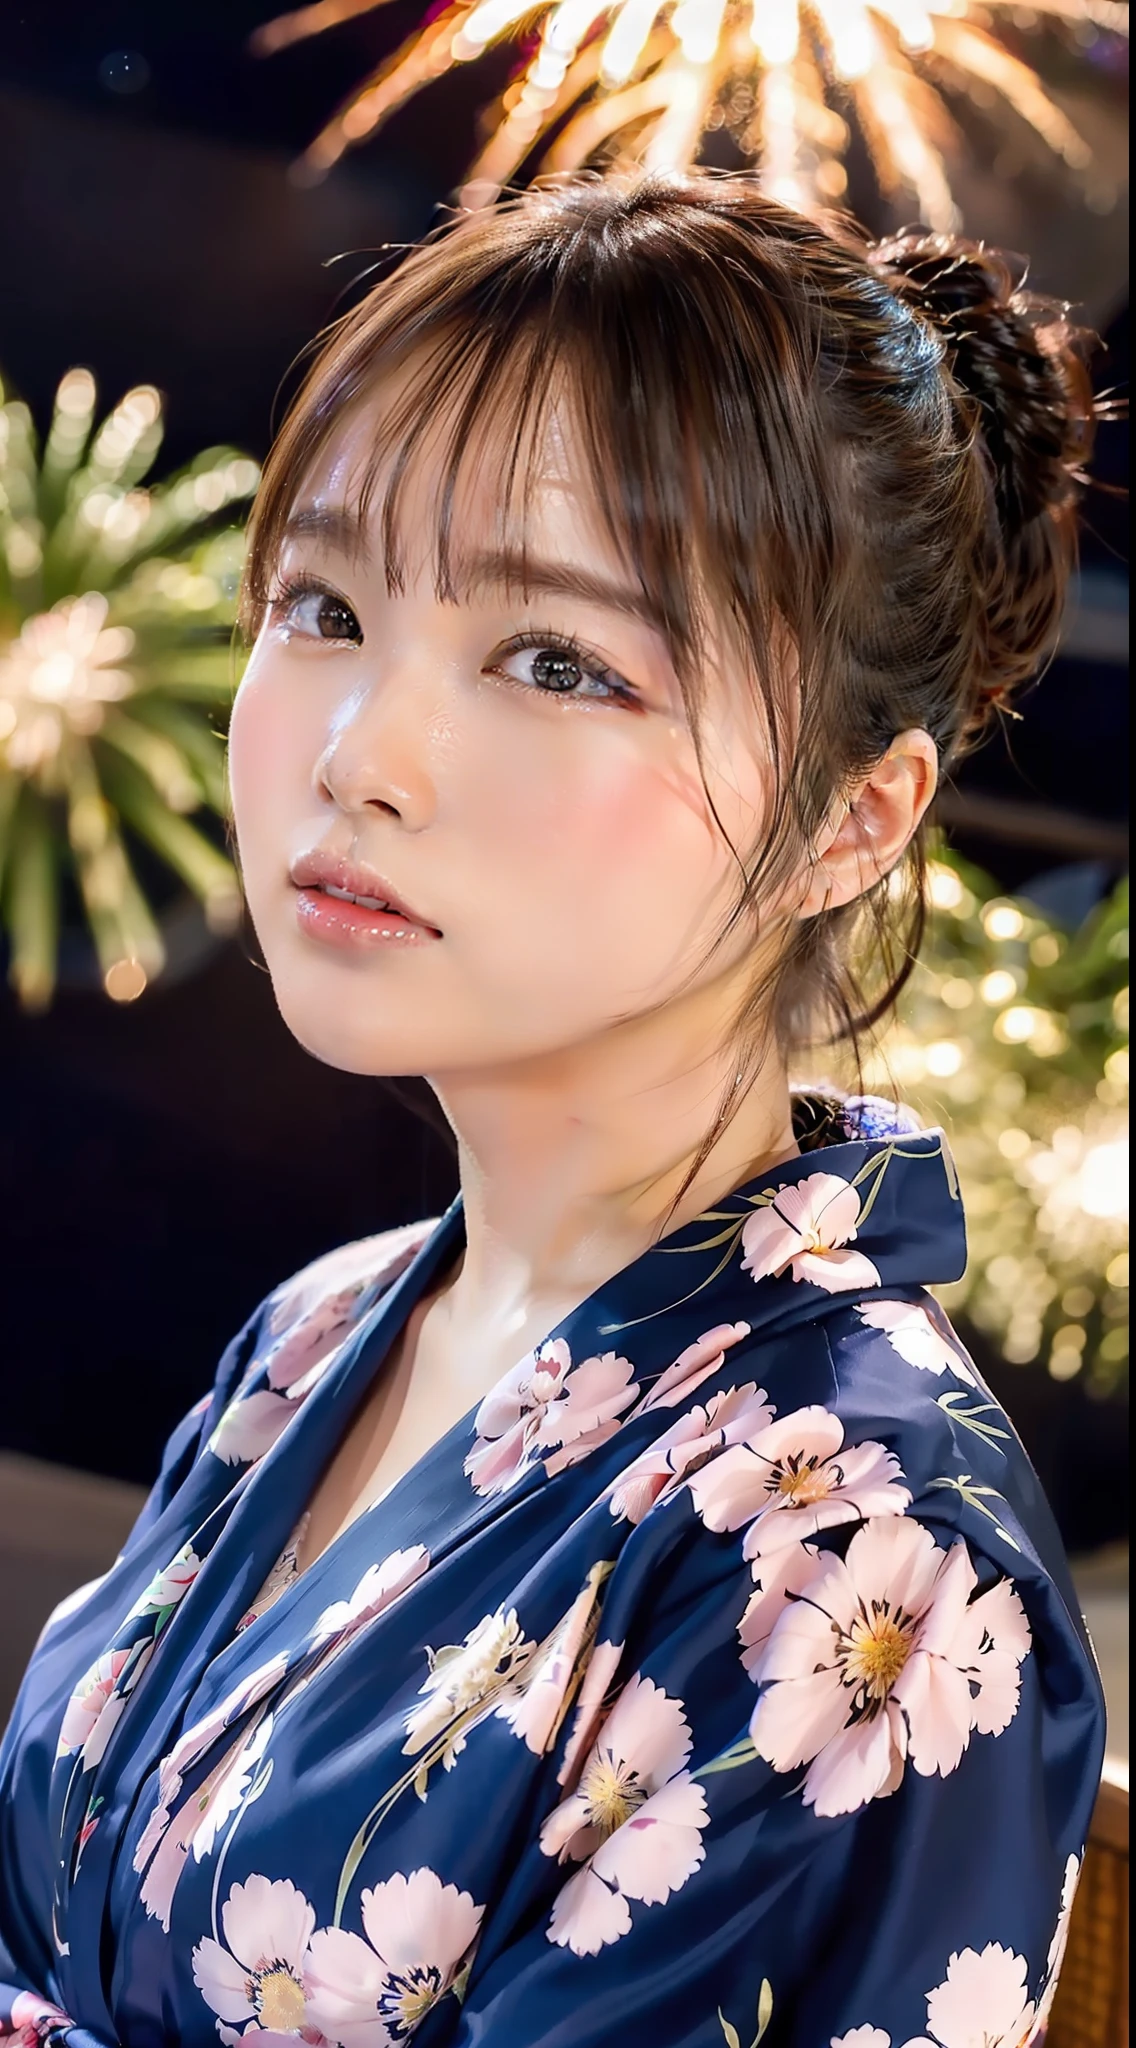 Top quality, fine detail, (beautiful one girl))), highly detailed eyes and face, fireworks, yukata, looking up at fireworks, ponytail, profile, sparkle in the eyes